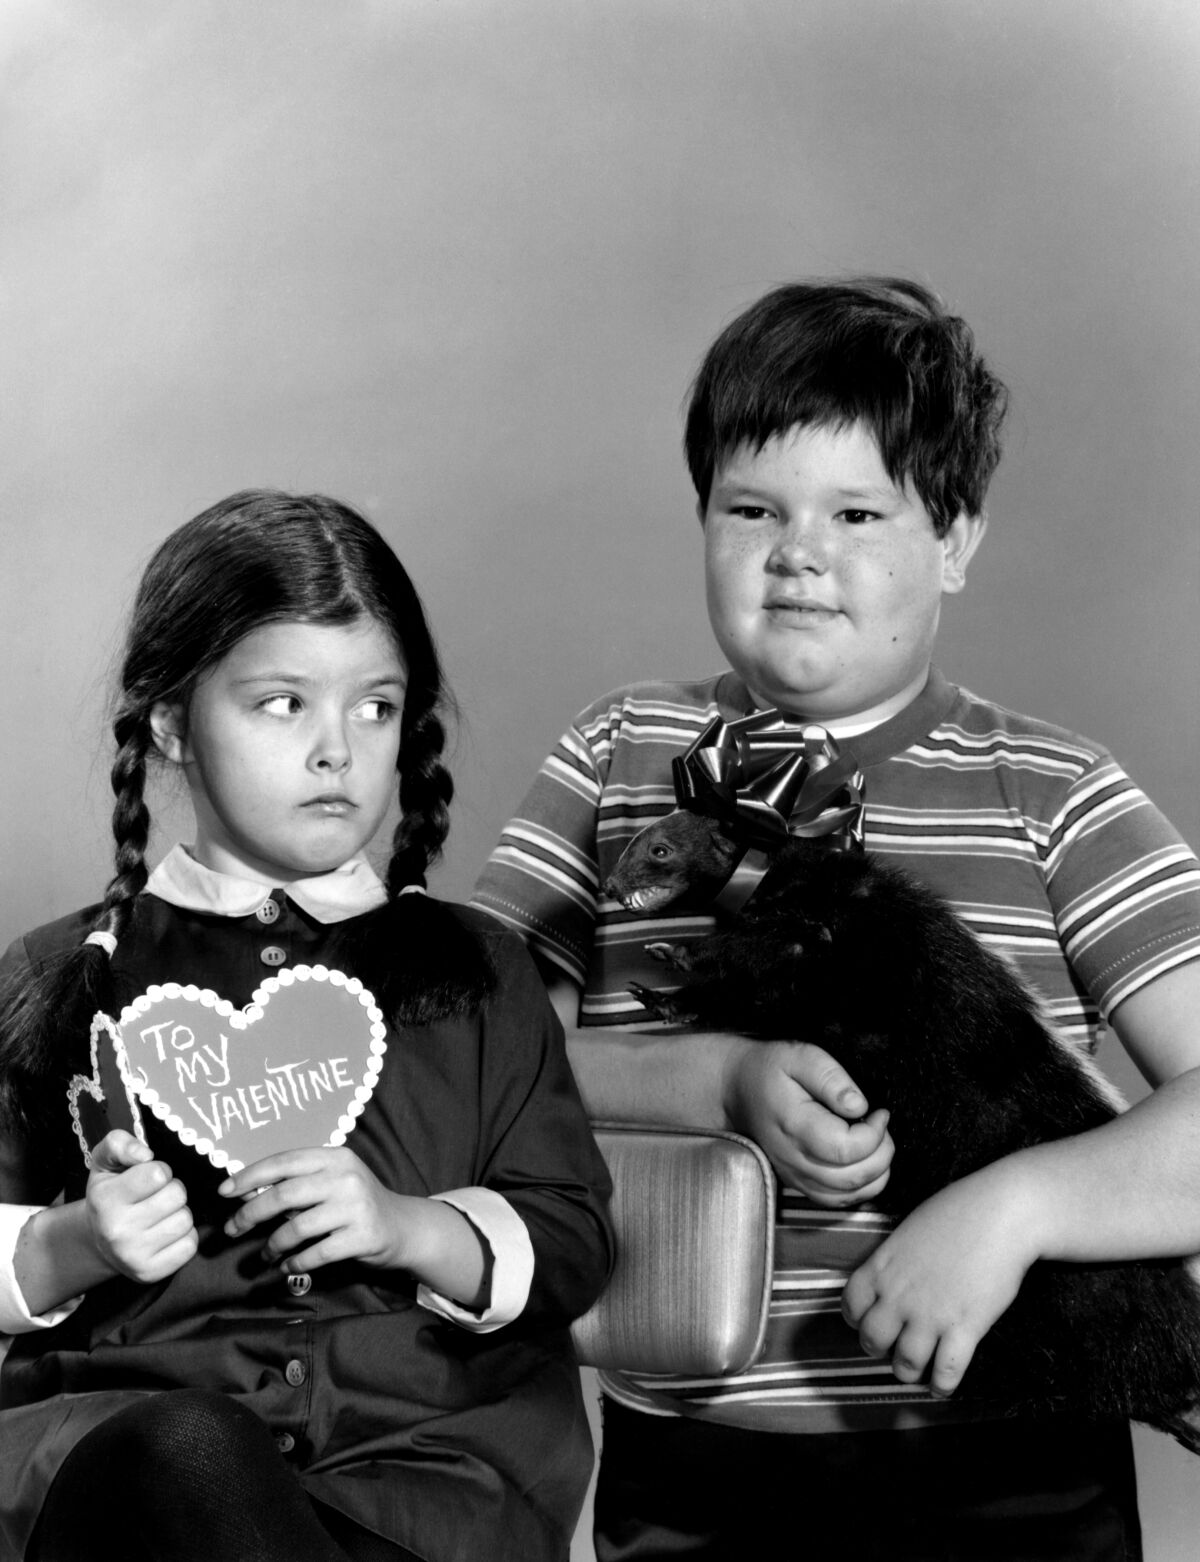 A black-and-white image of a little girl with long braids holding a valentine next to a little boy holding a stuffed animal